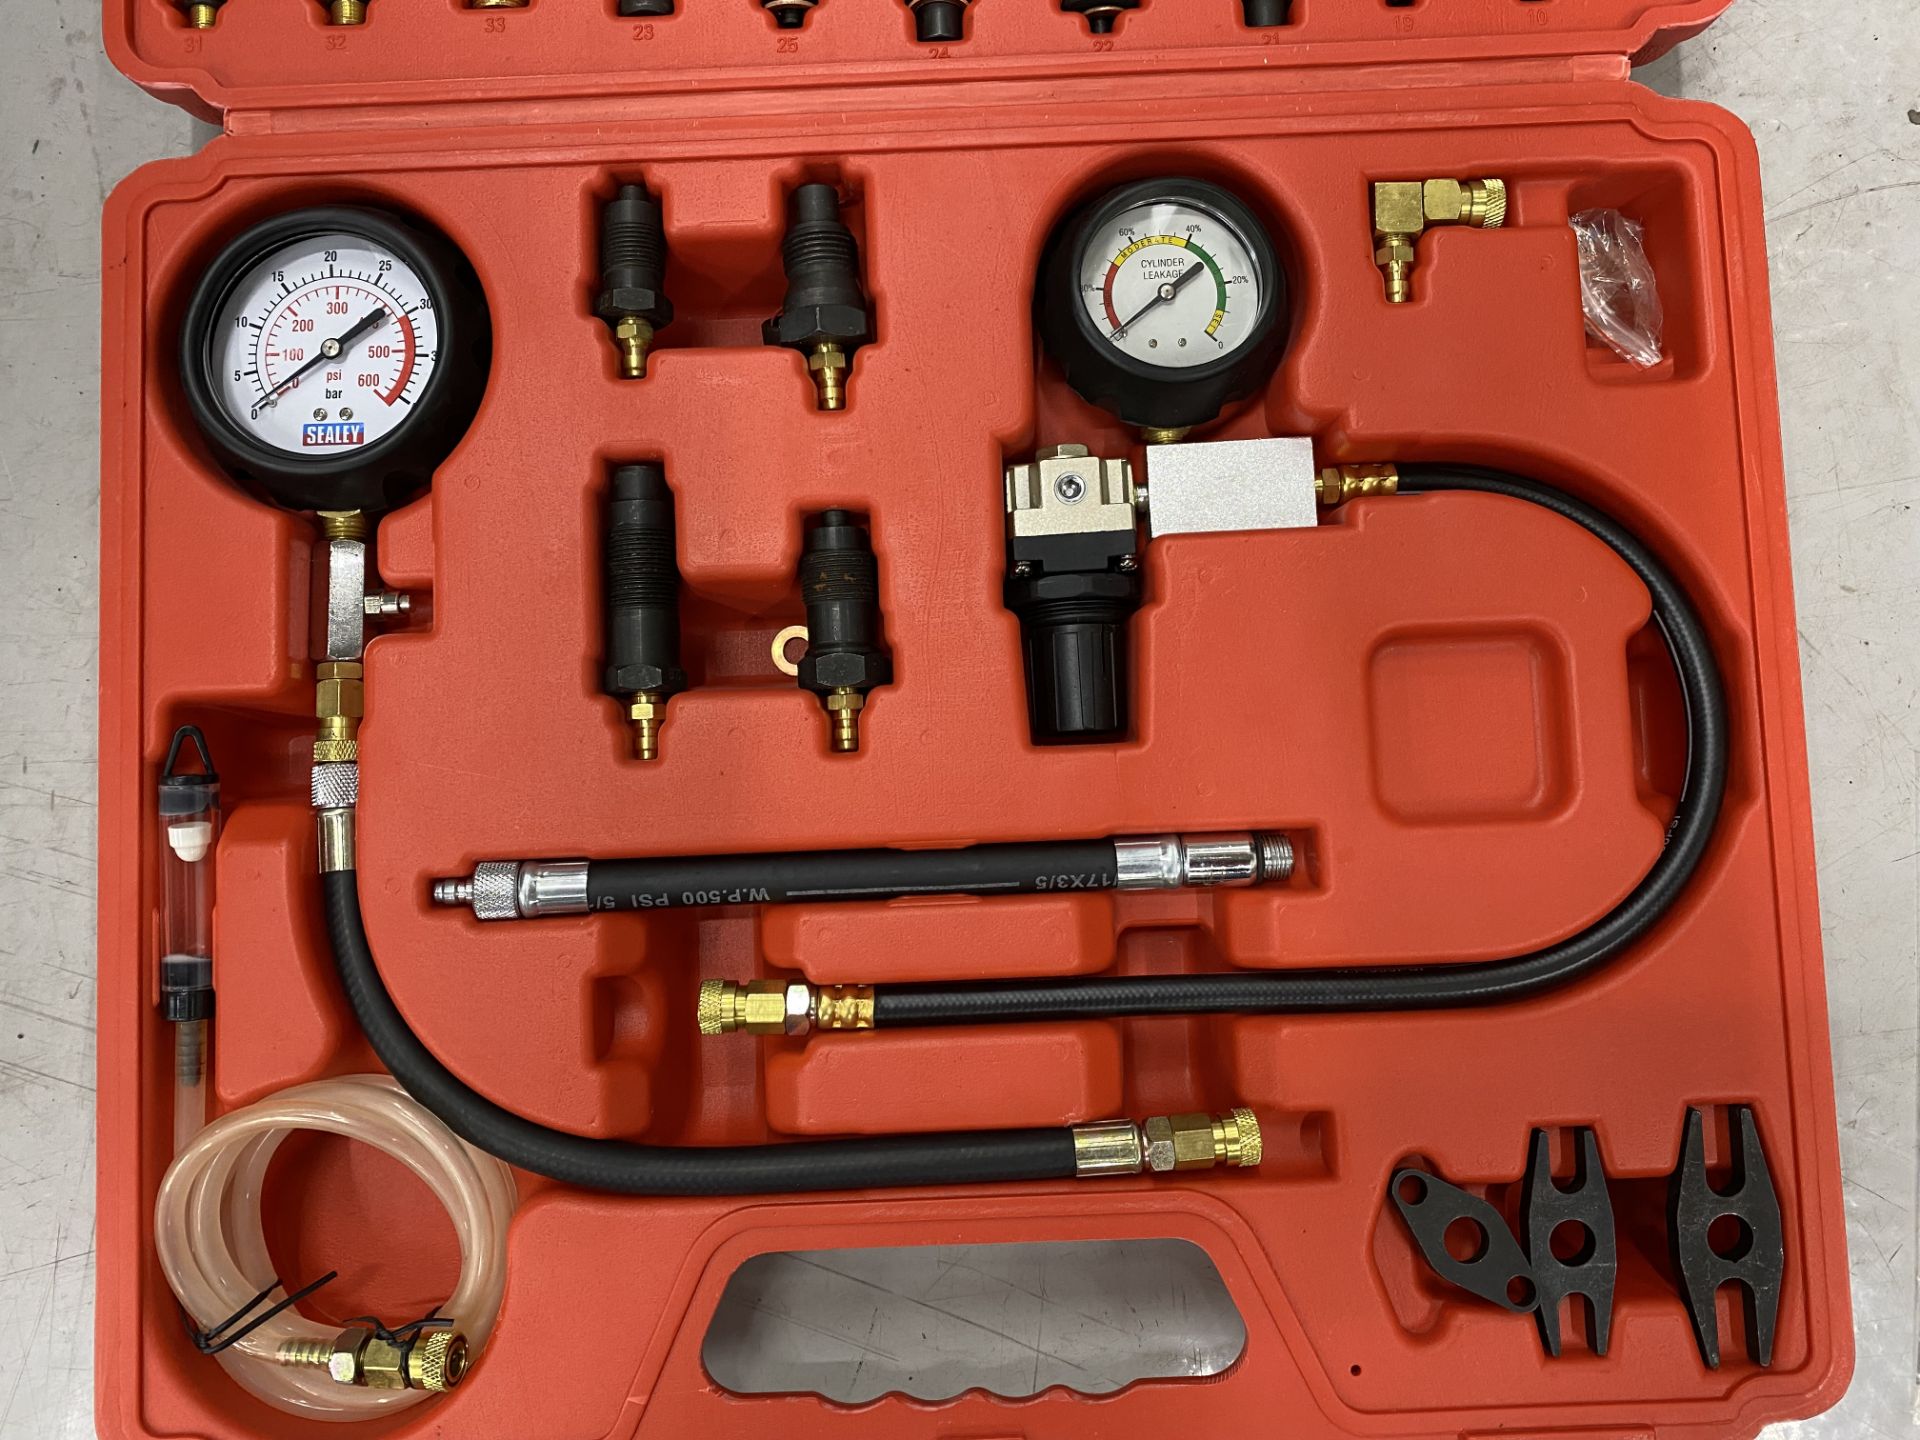 Sealey professional tools VSE 3156 petrol or Diesel compression leakage and TDC test kit - Image 3 of 5